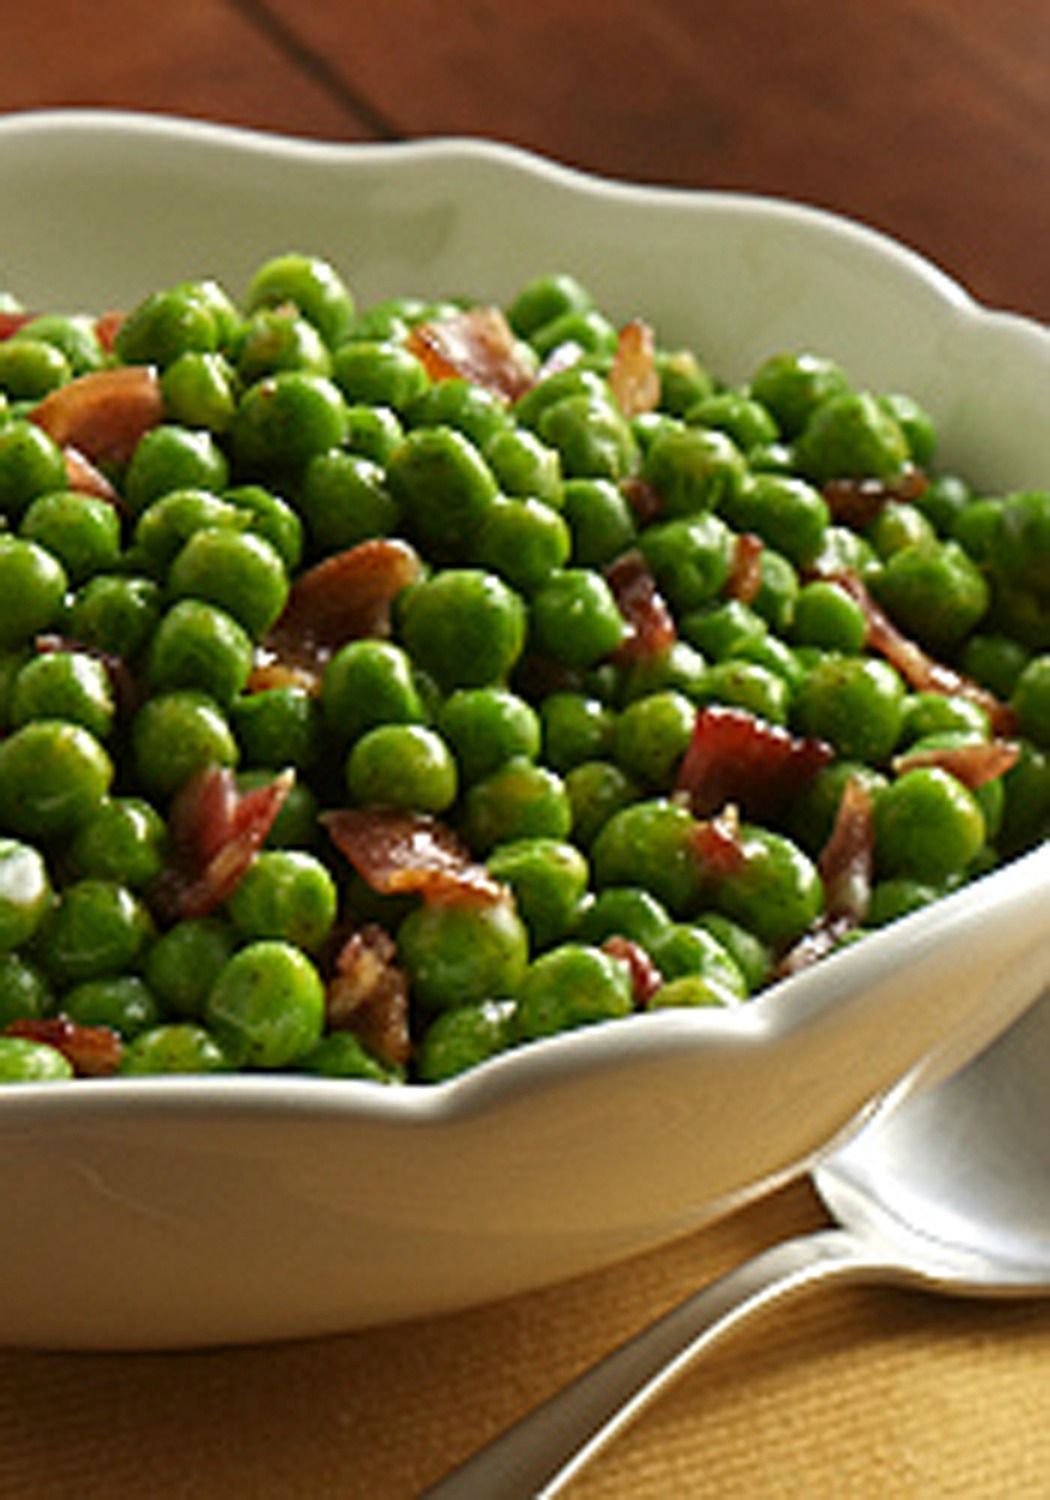 After trying this Peas with Bacon recipe one fan said “my family loved this recipe. It was easy to make and a very delicious